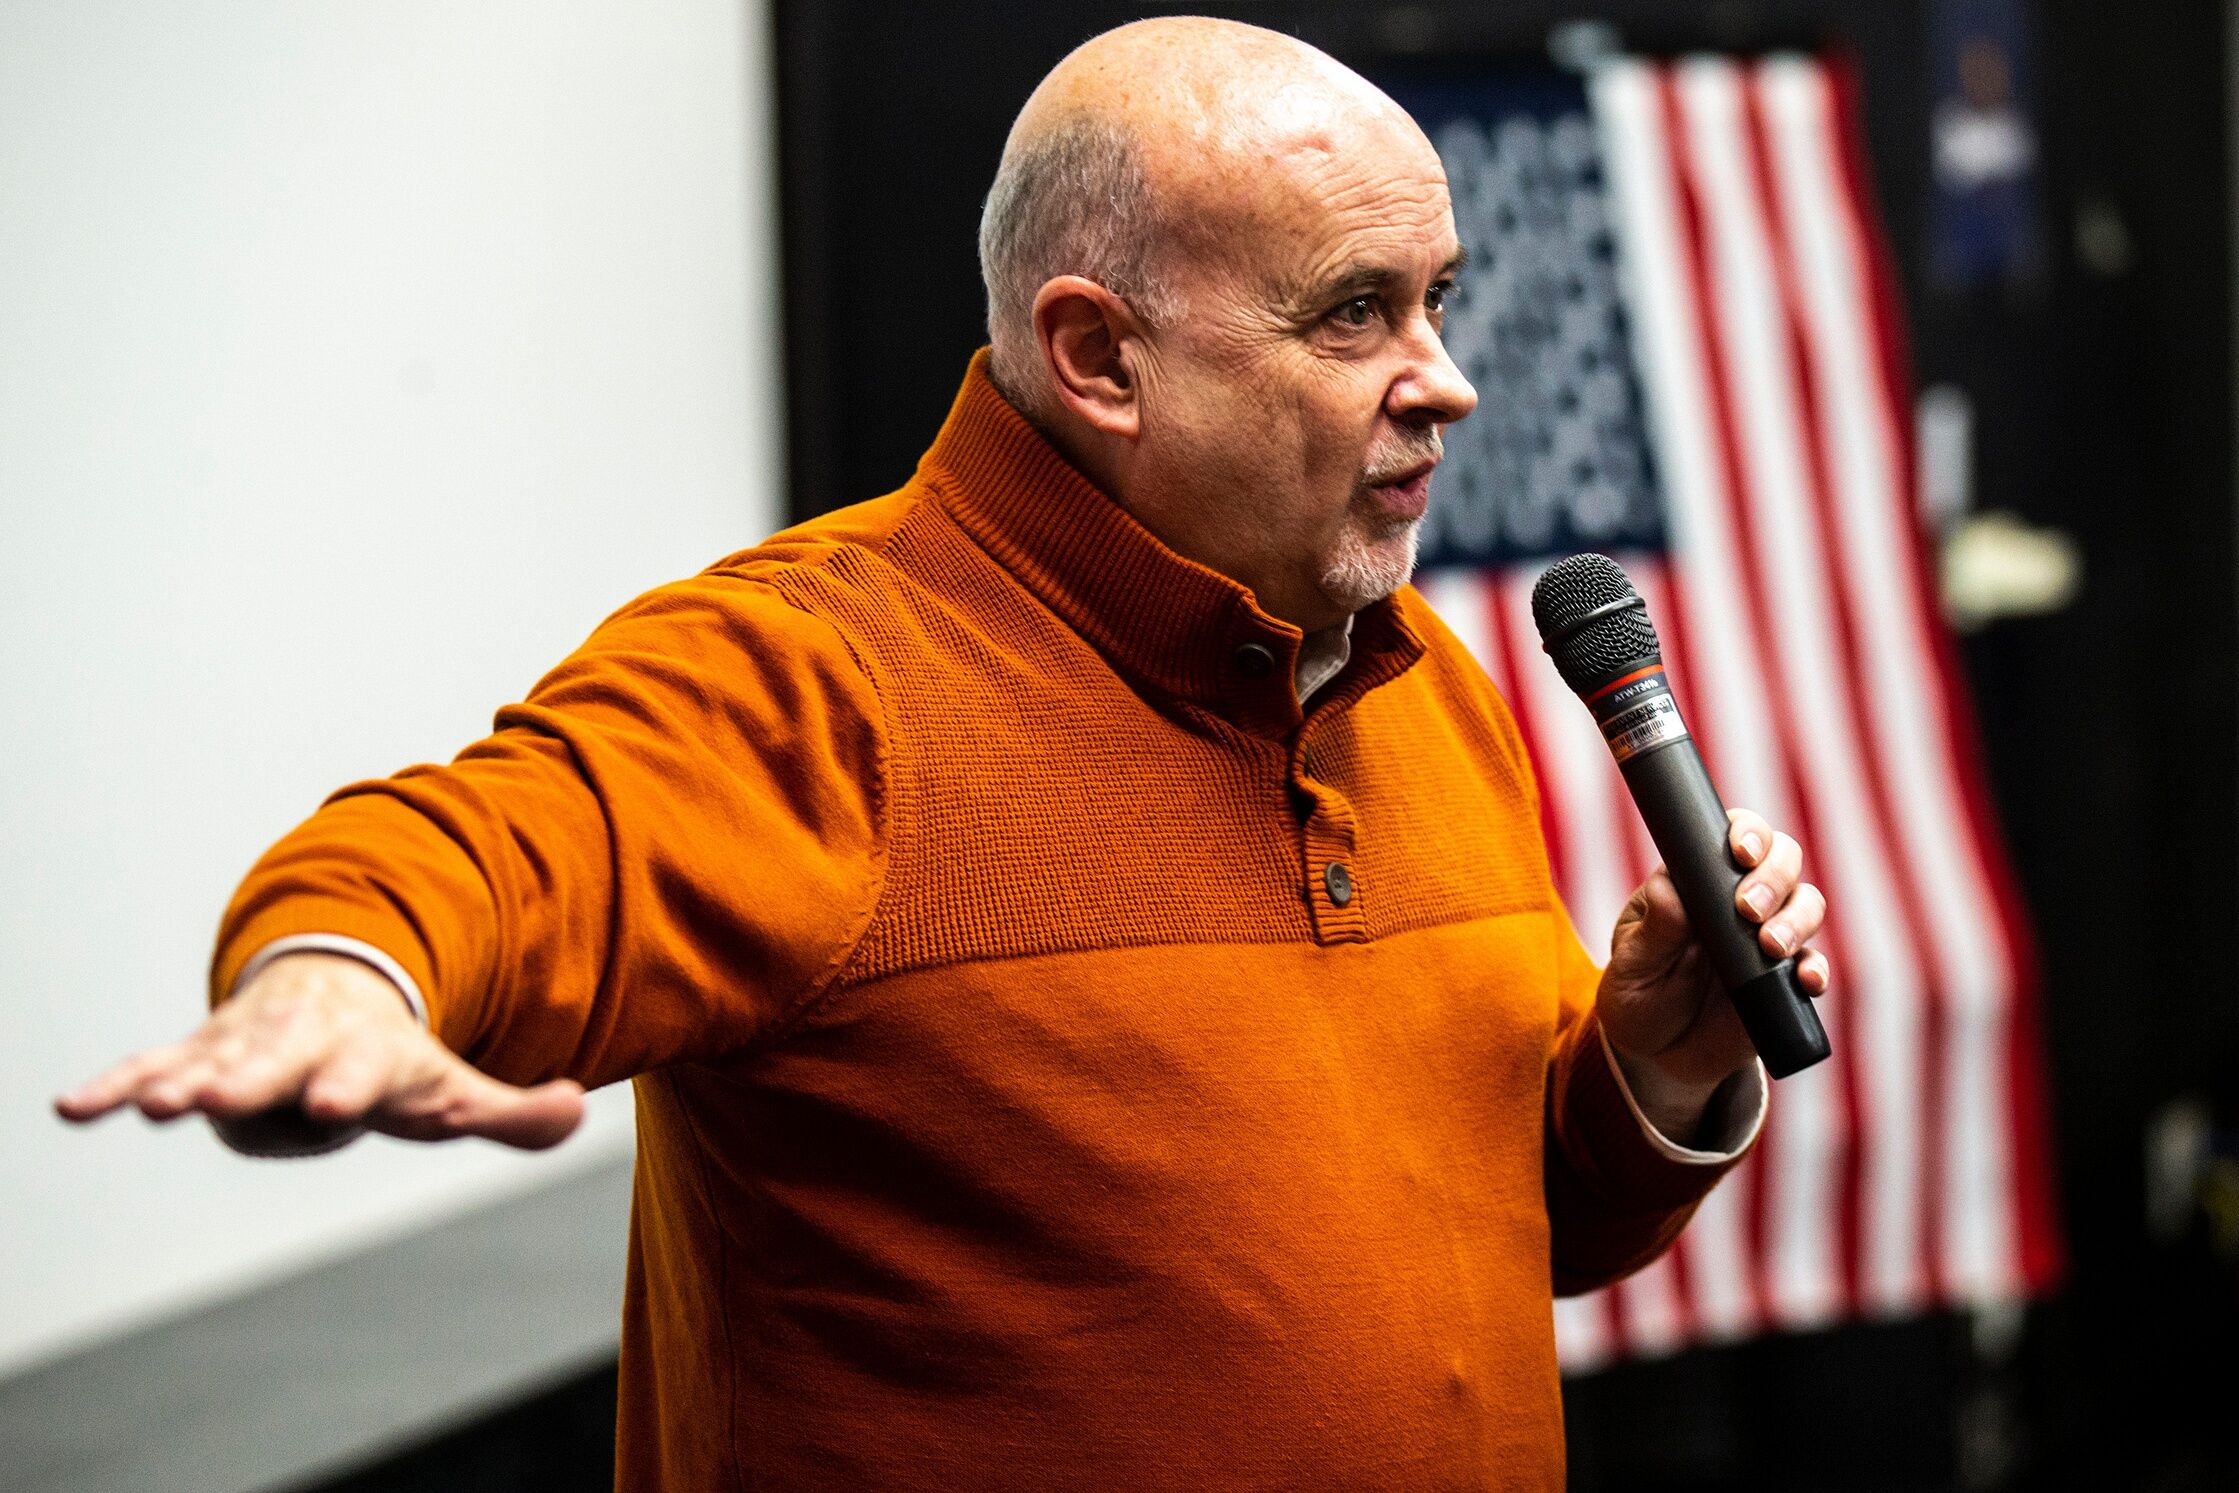 U.S. Rep. Mark Pocan, D-Wisc., speaks during a "Get Out The Vote" rally with the University of Iowa Democrats